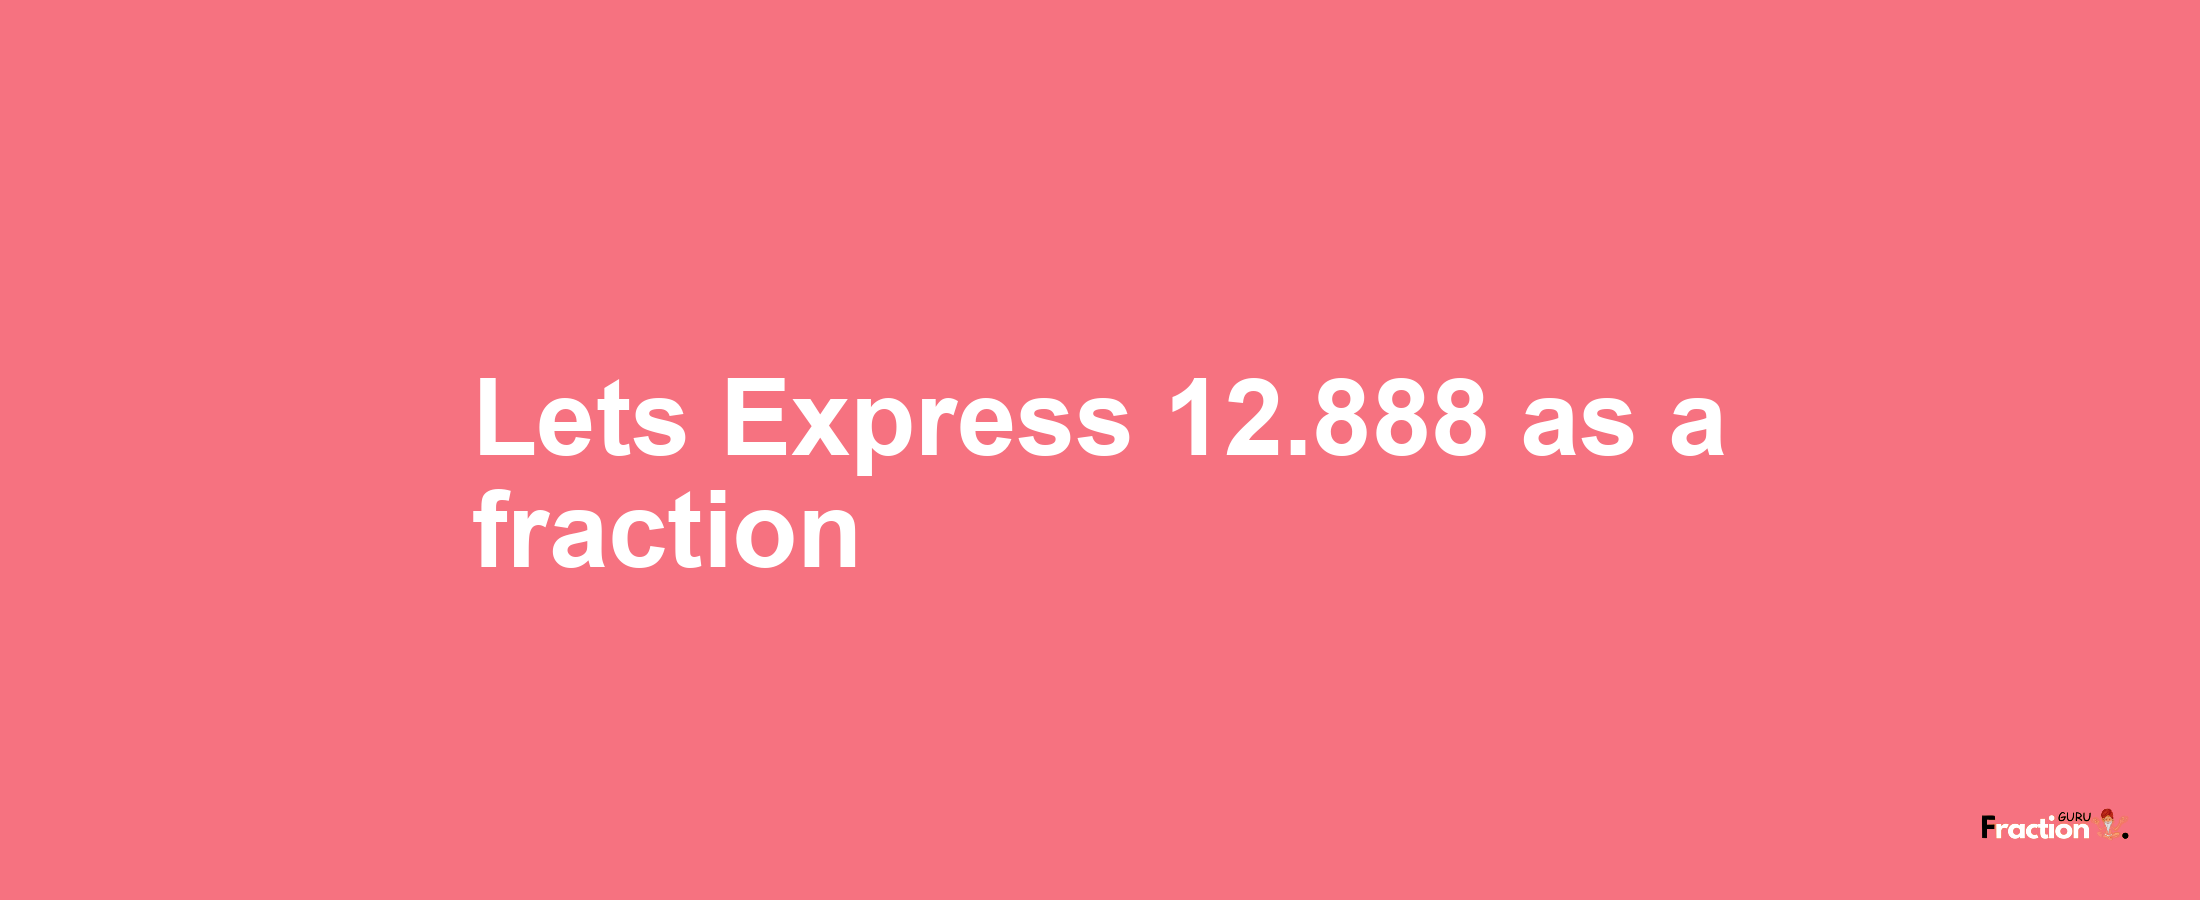 Lets Express 12.888 as afraction